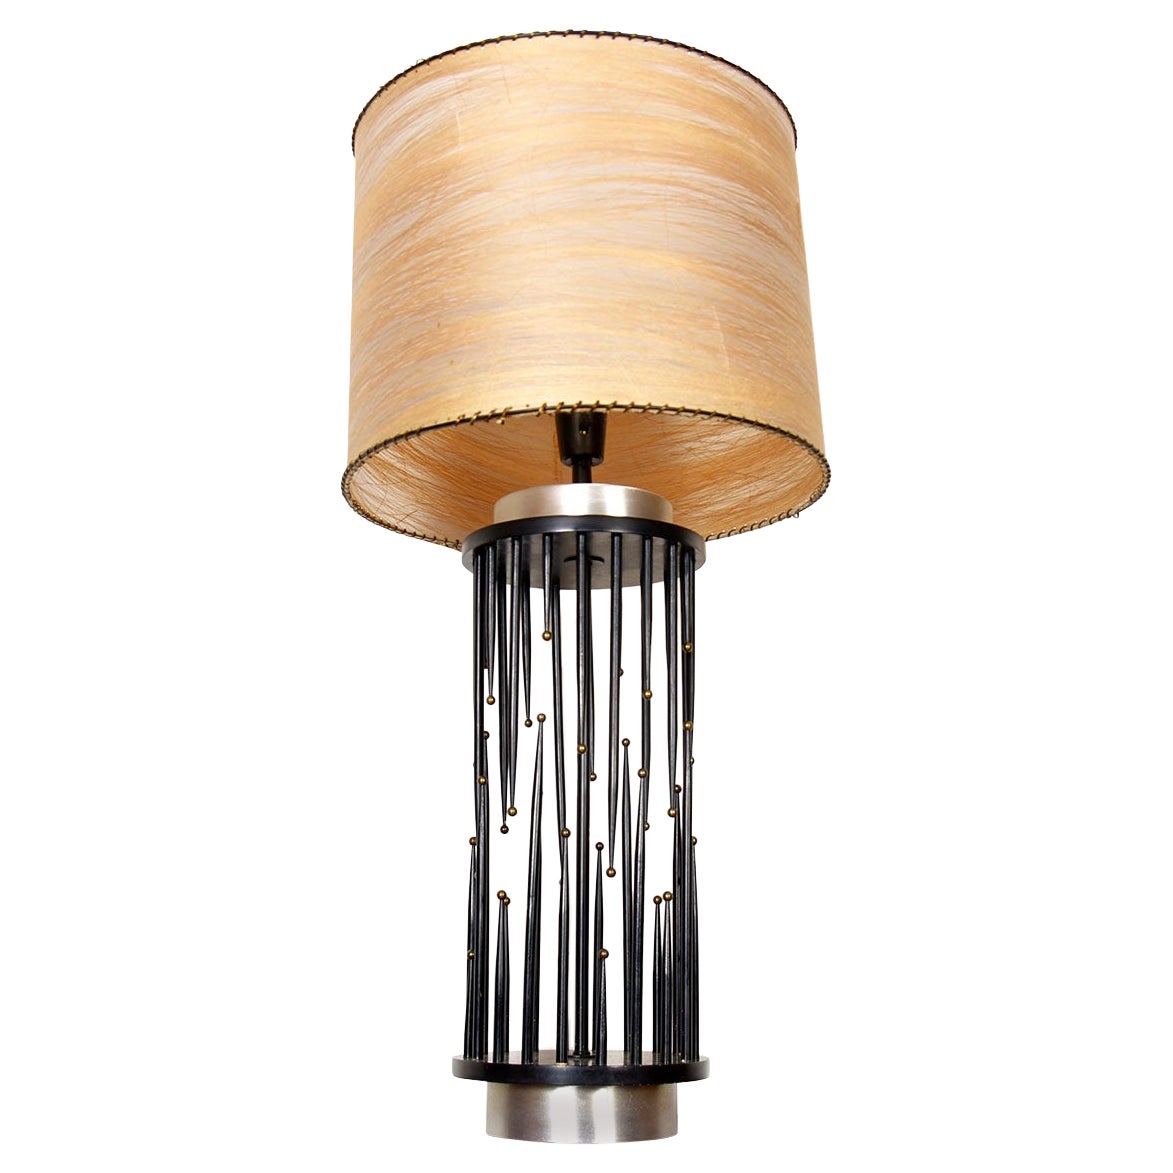 Stalactite Table Lamp in Brutalist Style with Original Matching Finial For Sale